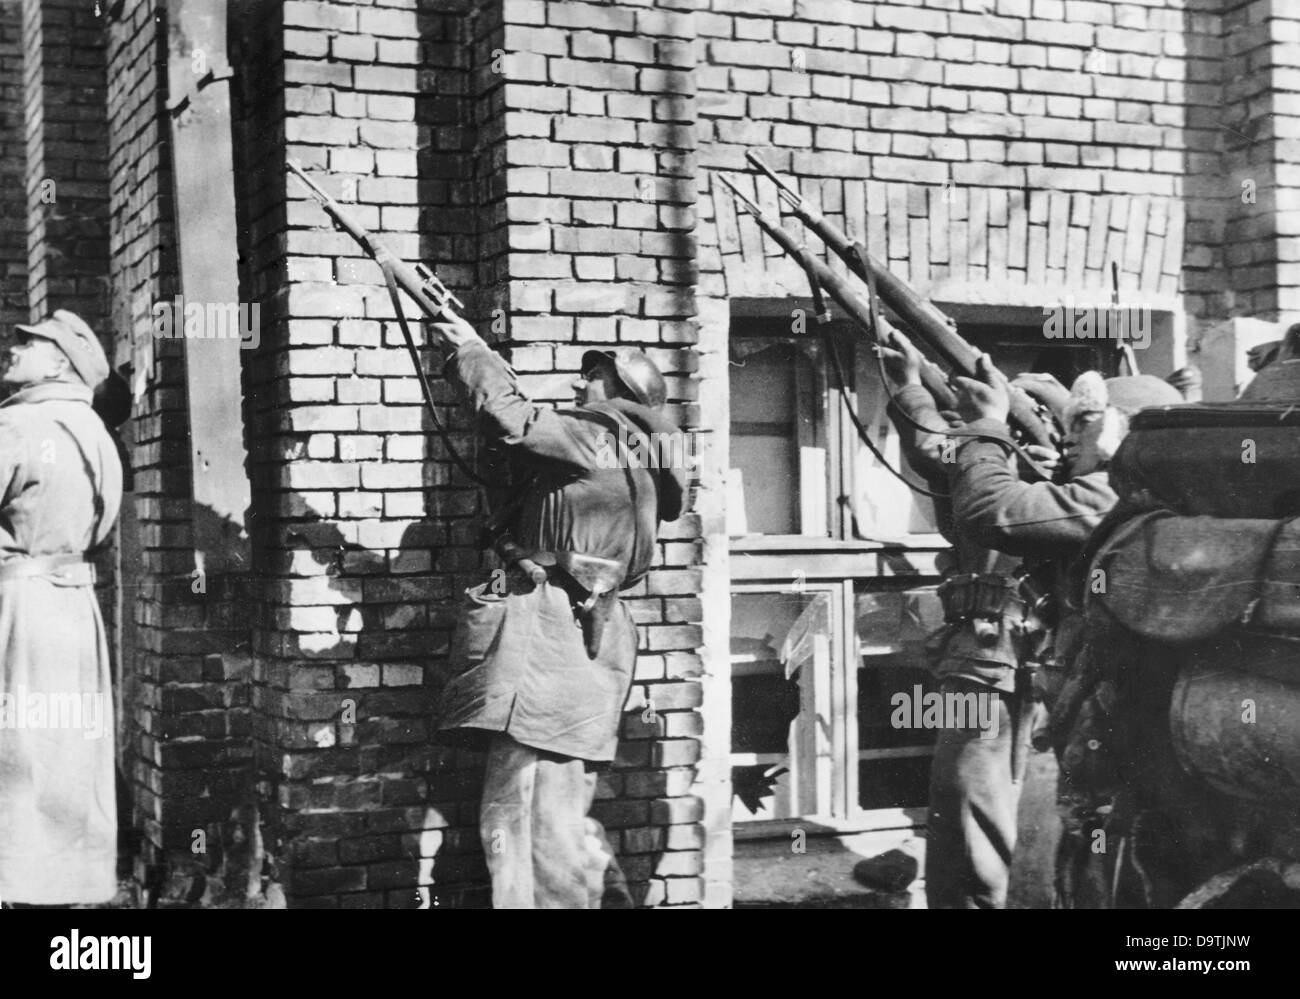 The Nazi Propaganda! on the back of the image reads: 'Street fights in Kharkiv. Against snipers on a building. Fire from below, fire from above, from the left, from all sides! These are the malices of urban warfare. The SS grenadiers, however, know about the tricks of the Soviets. Well-aimed shots finish the snipers from the roof, who mostly only fire when the Germans turn their backs on them.' Image from the Eastern Front/Ukraine, published 4 April 1943. The attack on the Soviet Union by the German Reich was agreed on in July 1940 and prepared as the 'Operation Barbarossa' since December 1940 Stock Photo